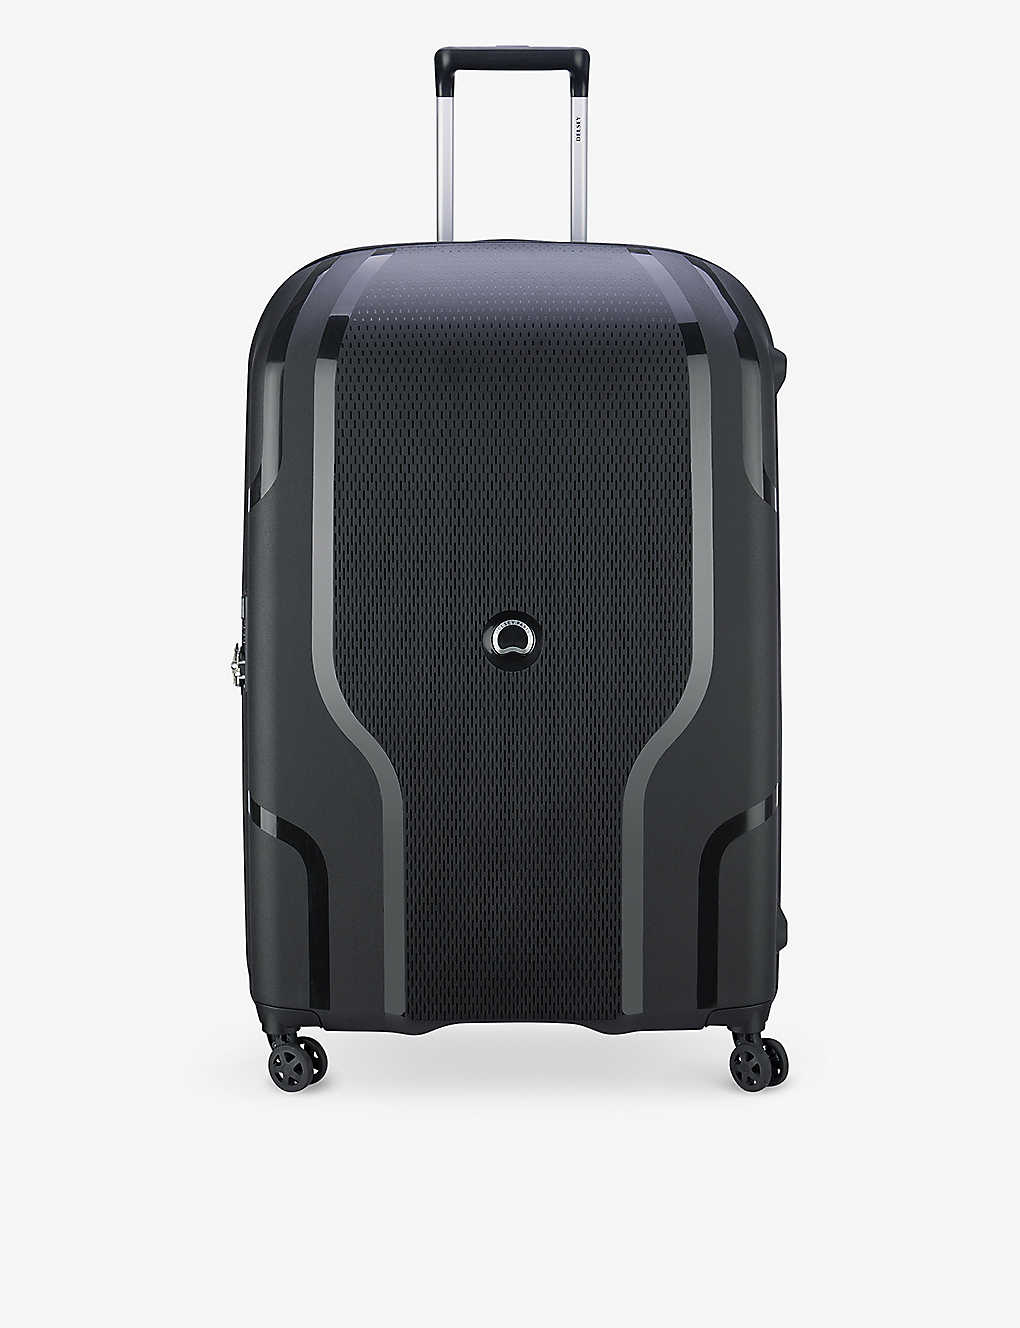 Delsey Black Clavel 4-wheel Xl Expandable Recycled-polypropylene Hard Check-in Suitcase 82cm